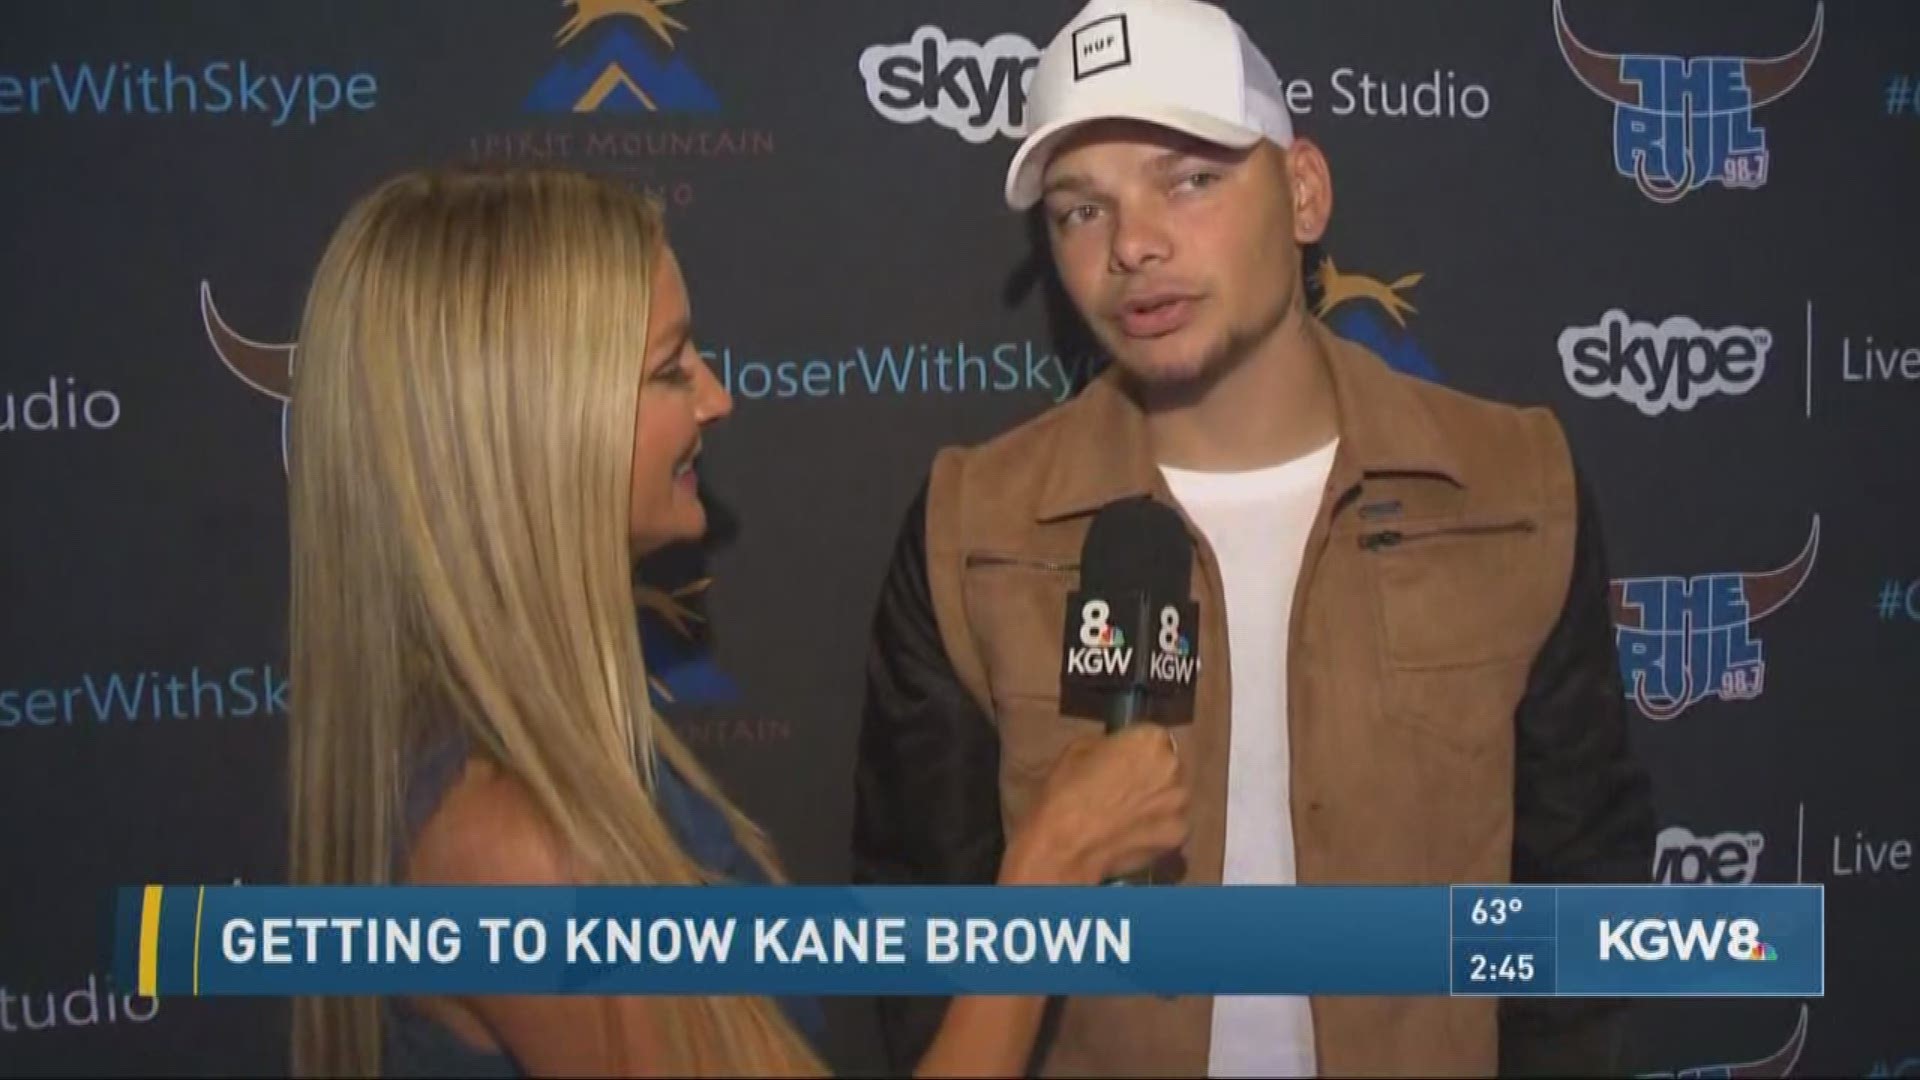 Getting to know Kane Brown